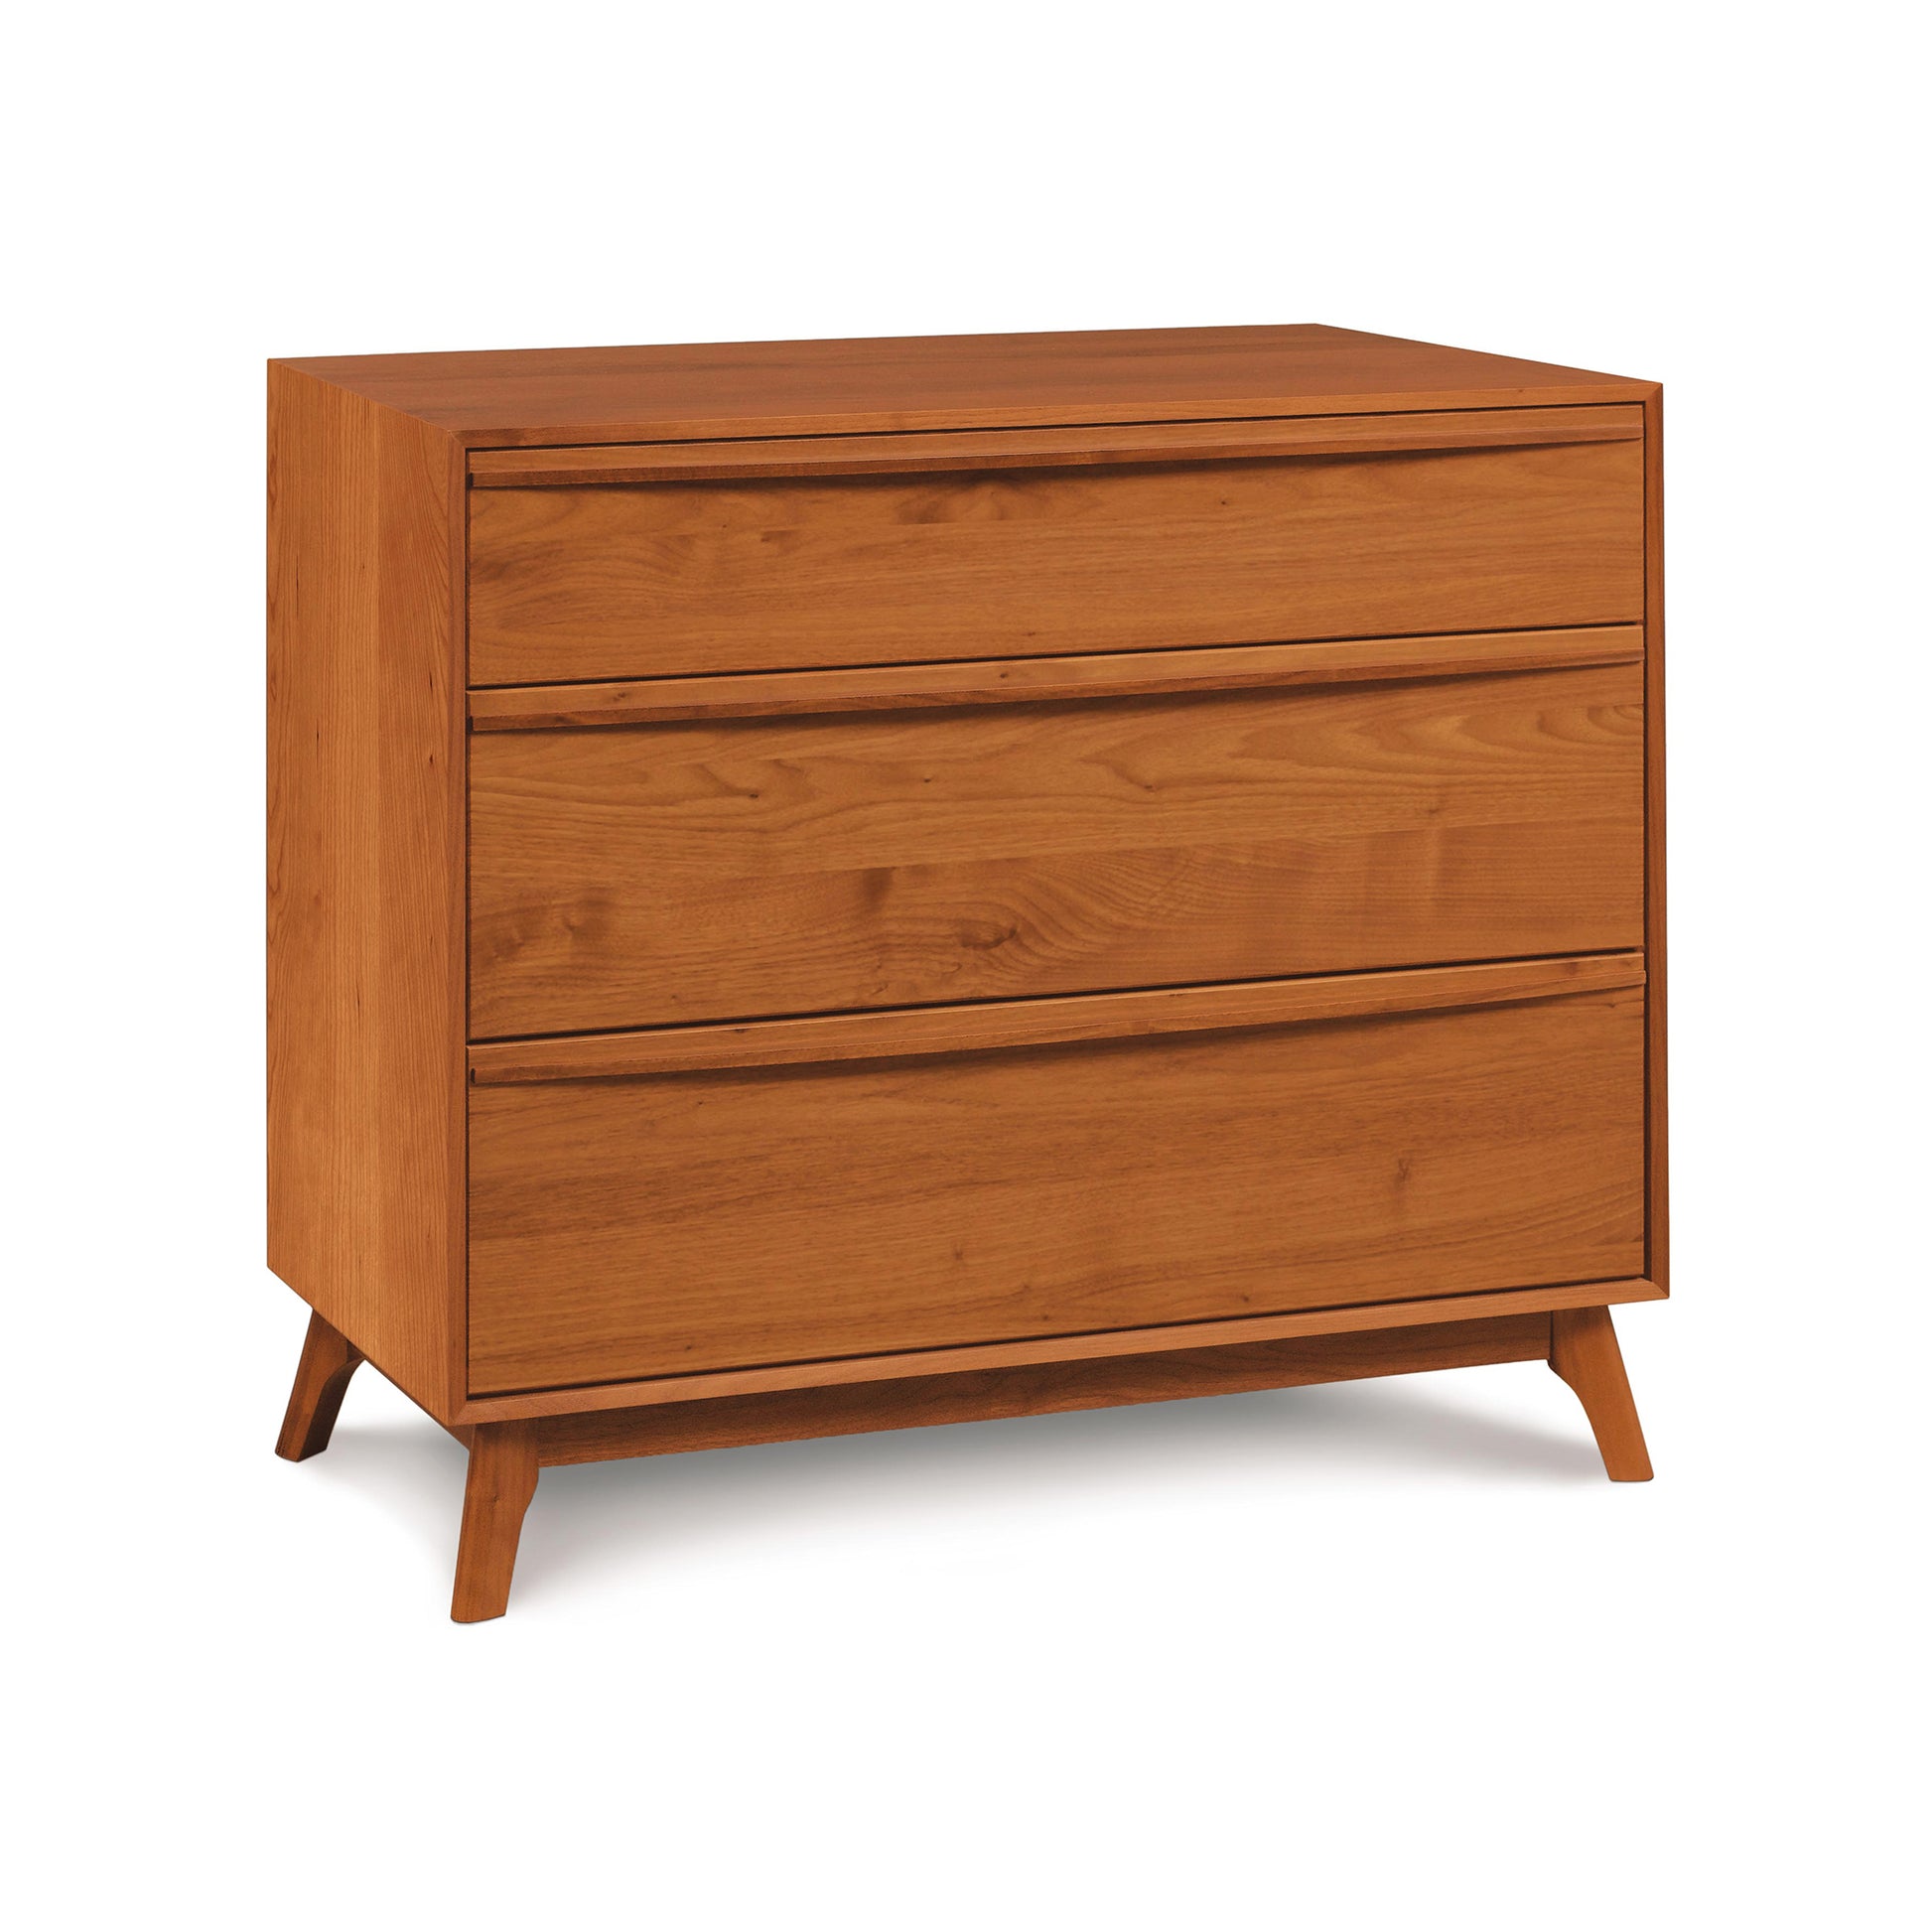 A modern Copeland Furniture Catalina 3-Drawer Chest crafted from solid walnut hardwood, featuring angled legs on a plain background.